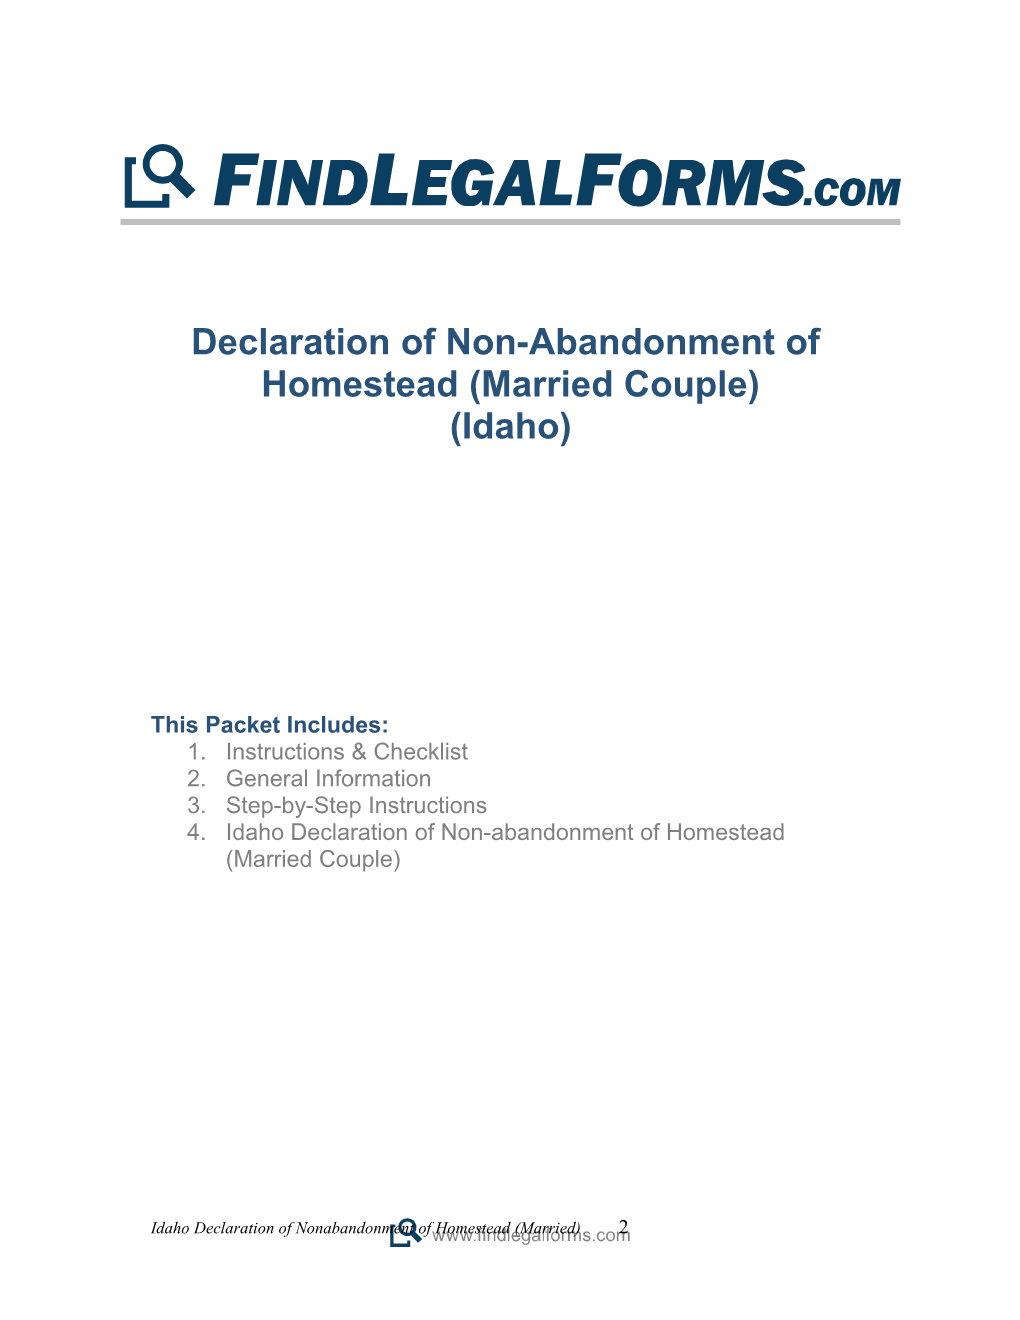 Declaration of Non-Abandonment of Homestead (Married) Idaho